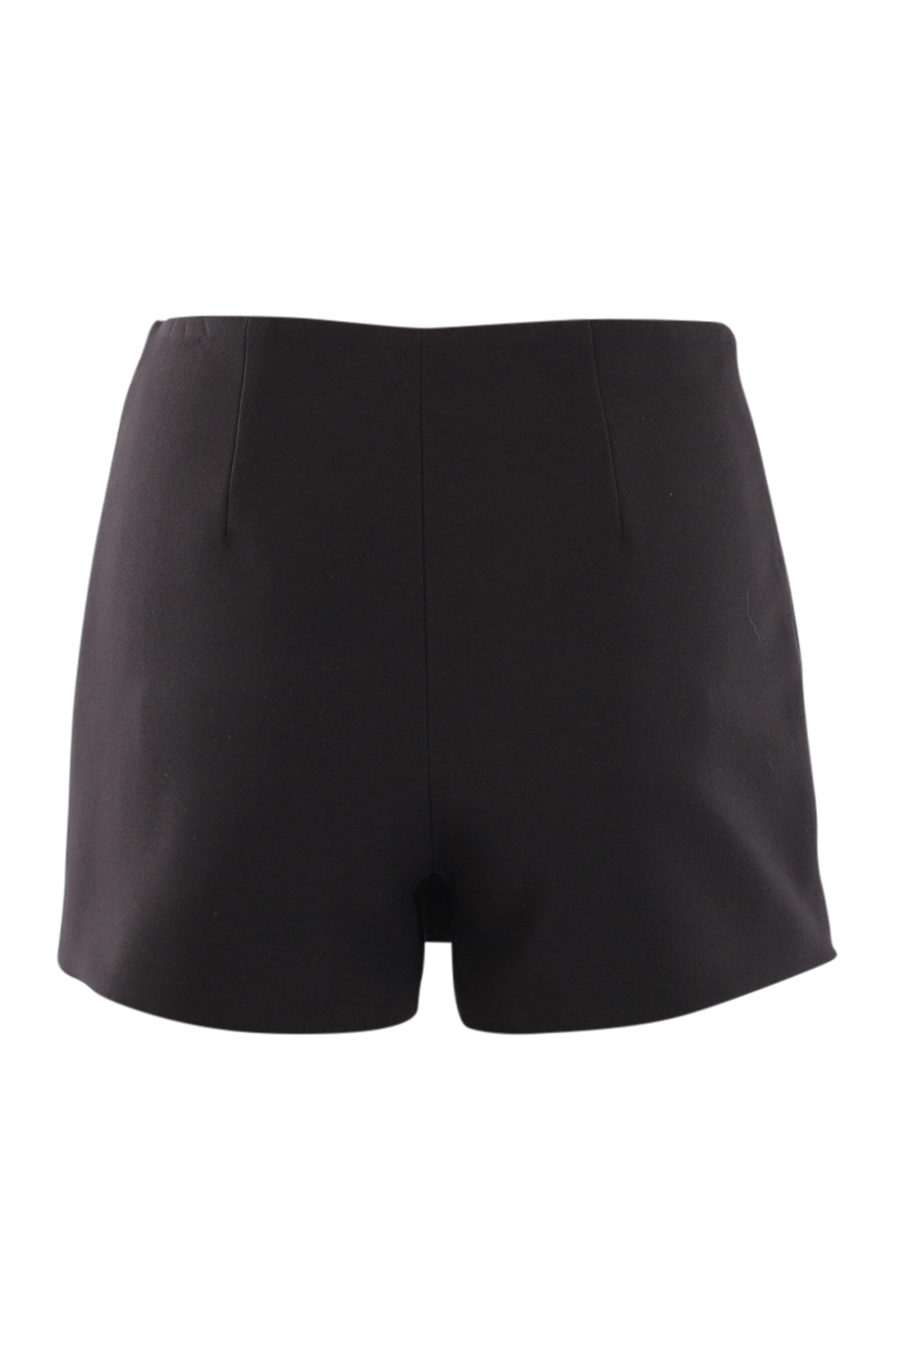 Black pleated shorts with gold buttons - IMG 0584